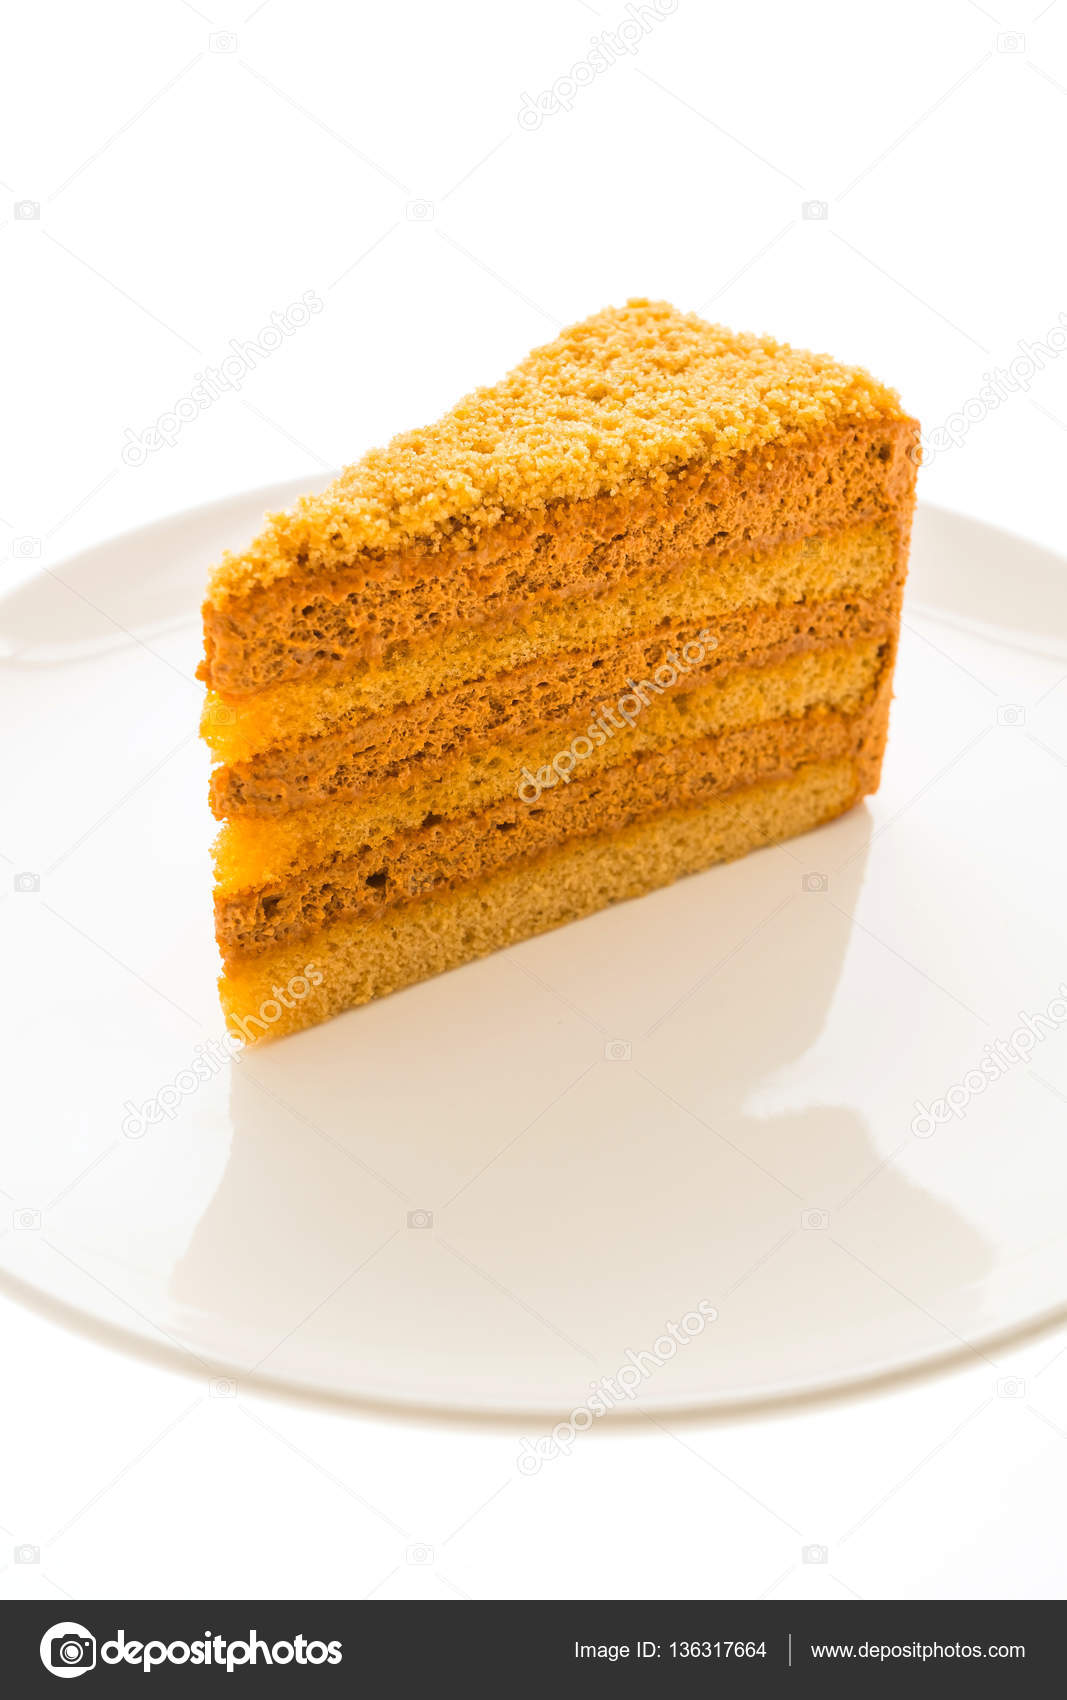 Thai Tea Cake In White Plate Stock Photo C Mrsiraphol 136317664,Cooking Ribs In Oven